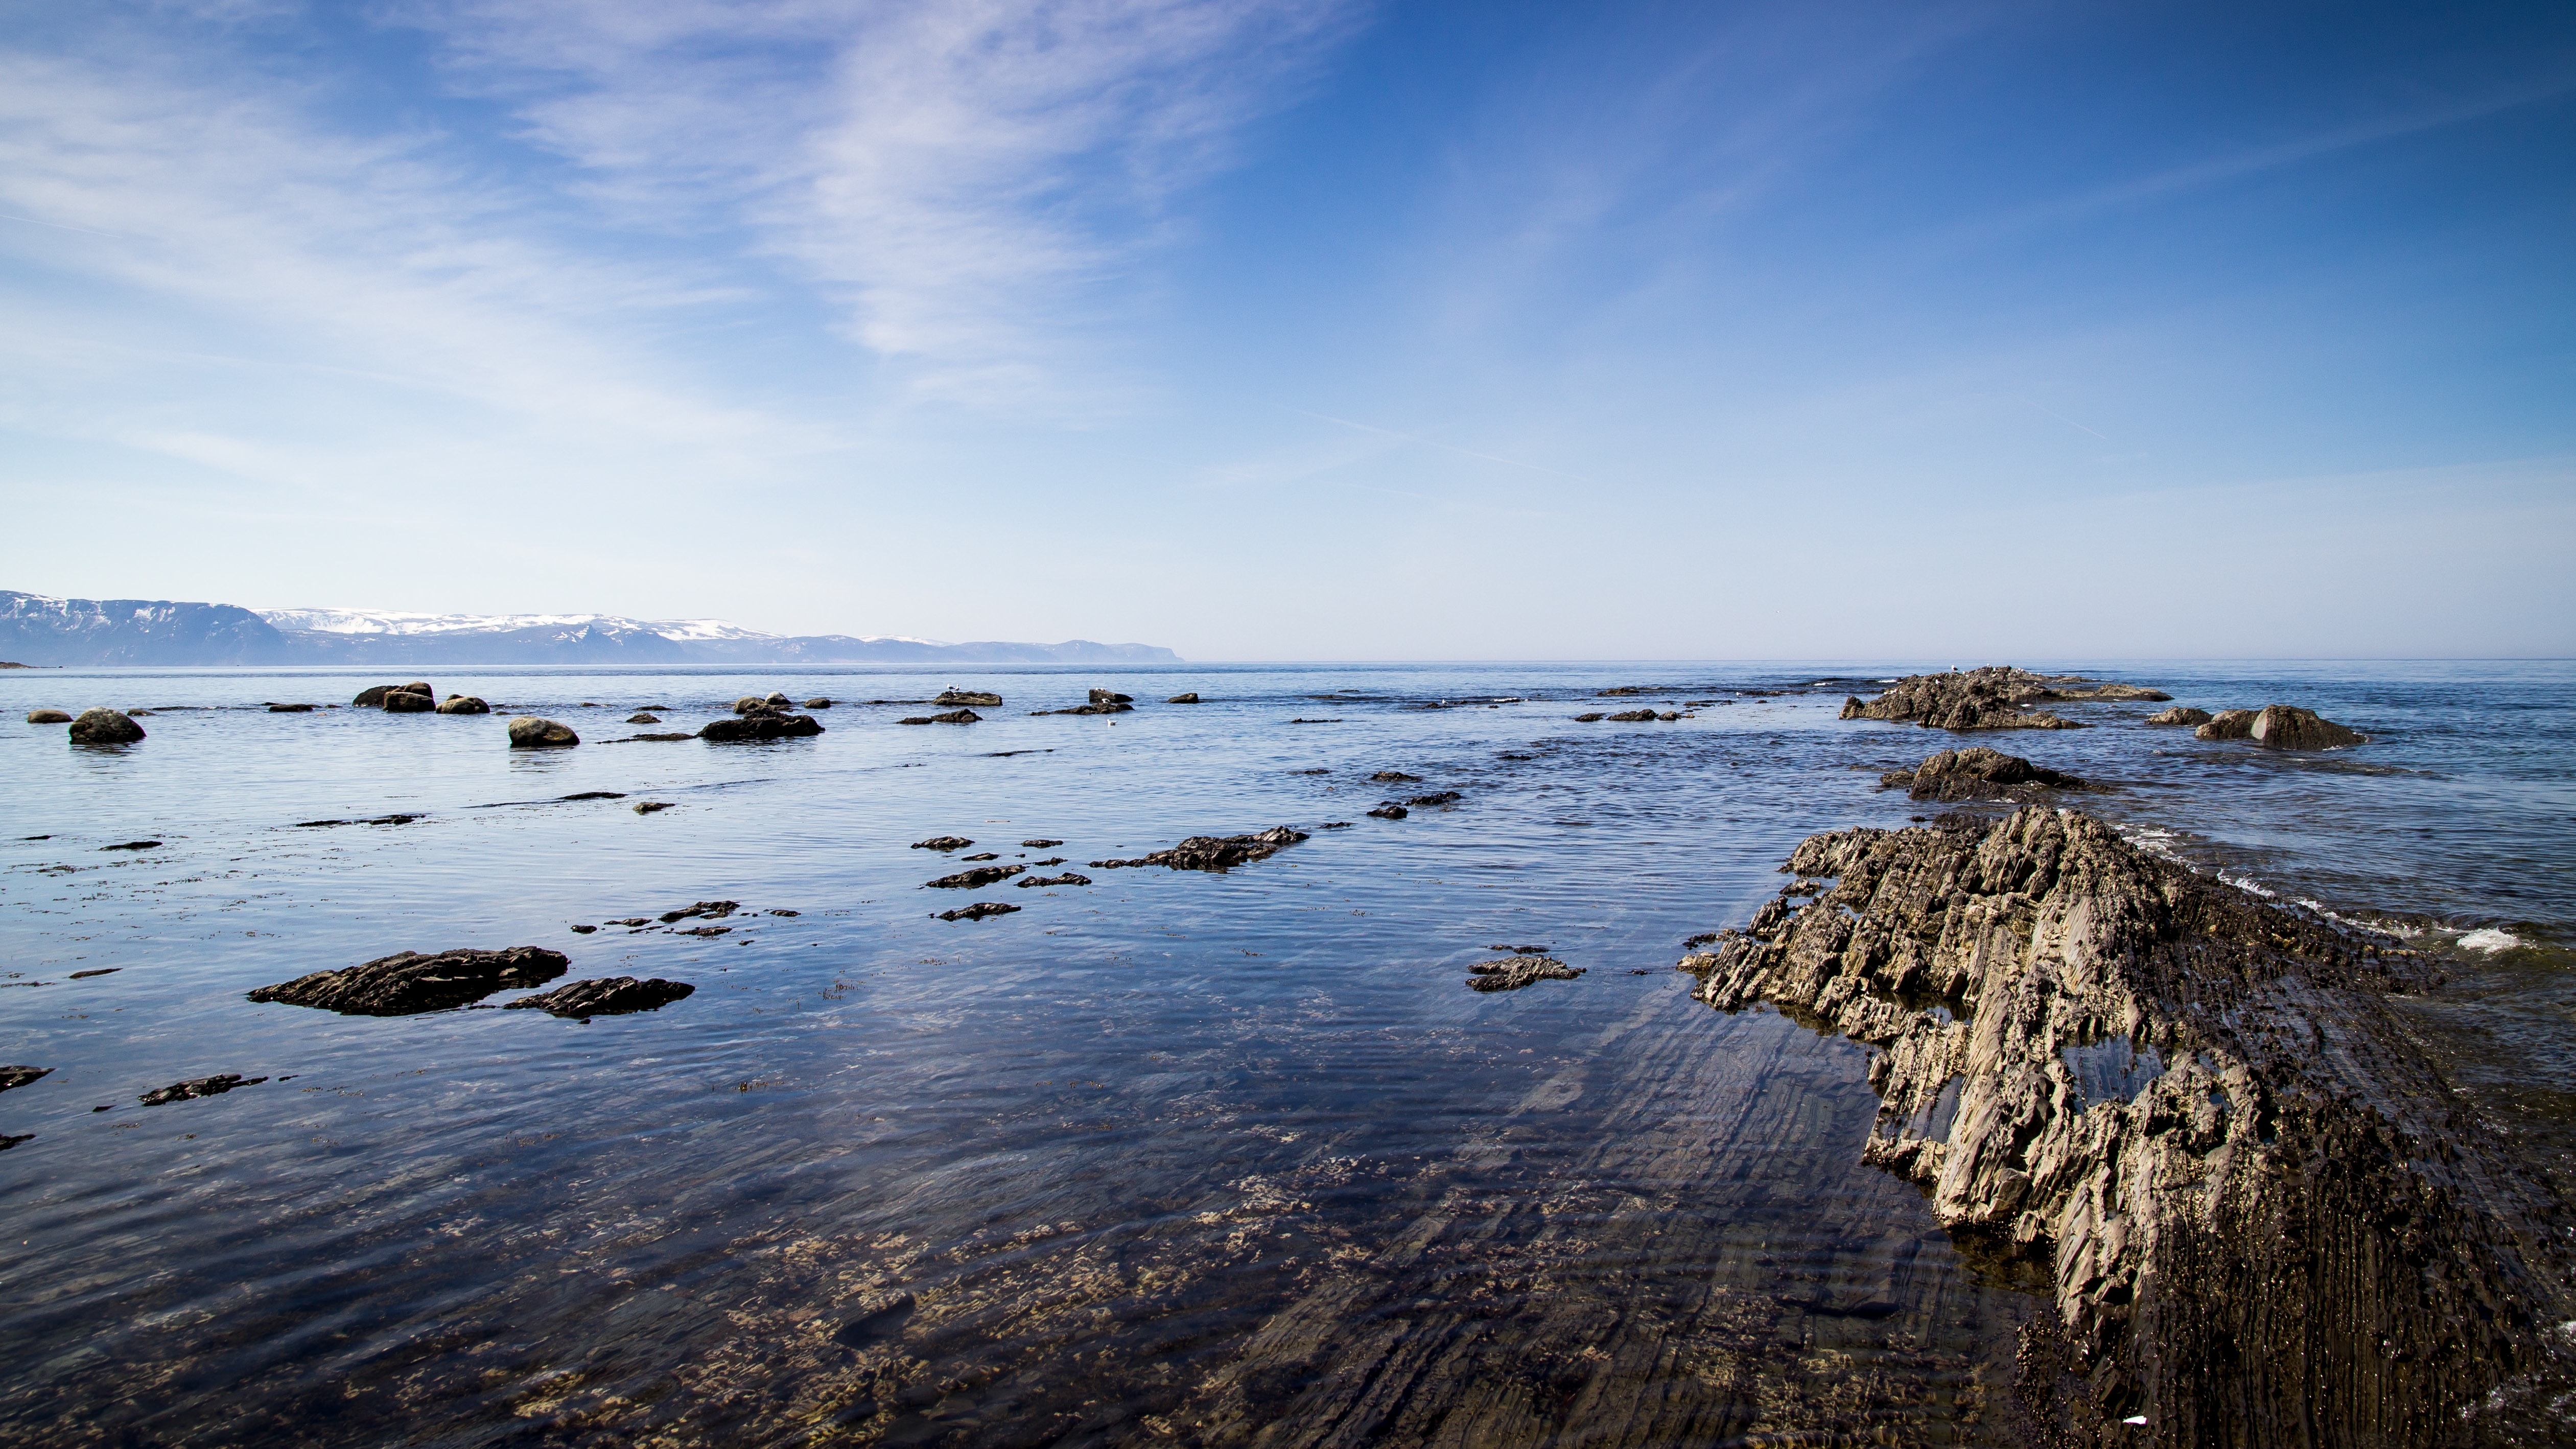 Rocky coastline and shallow waters